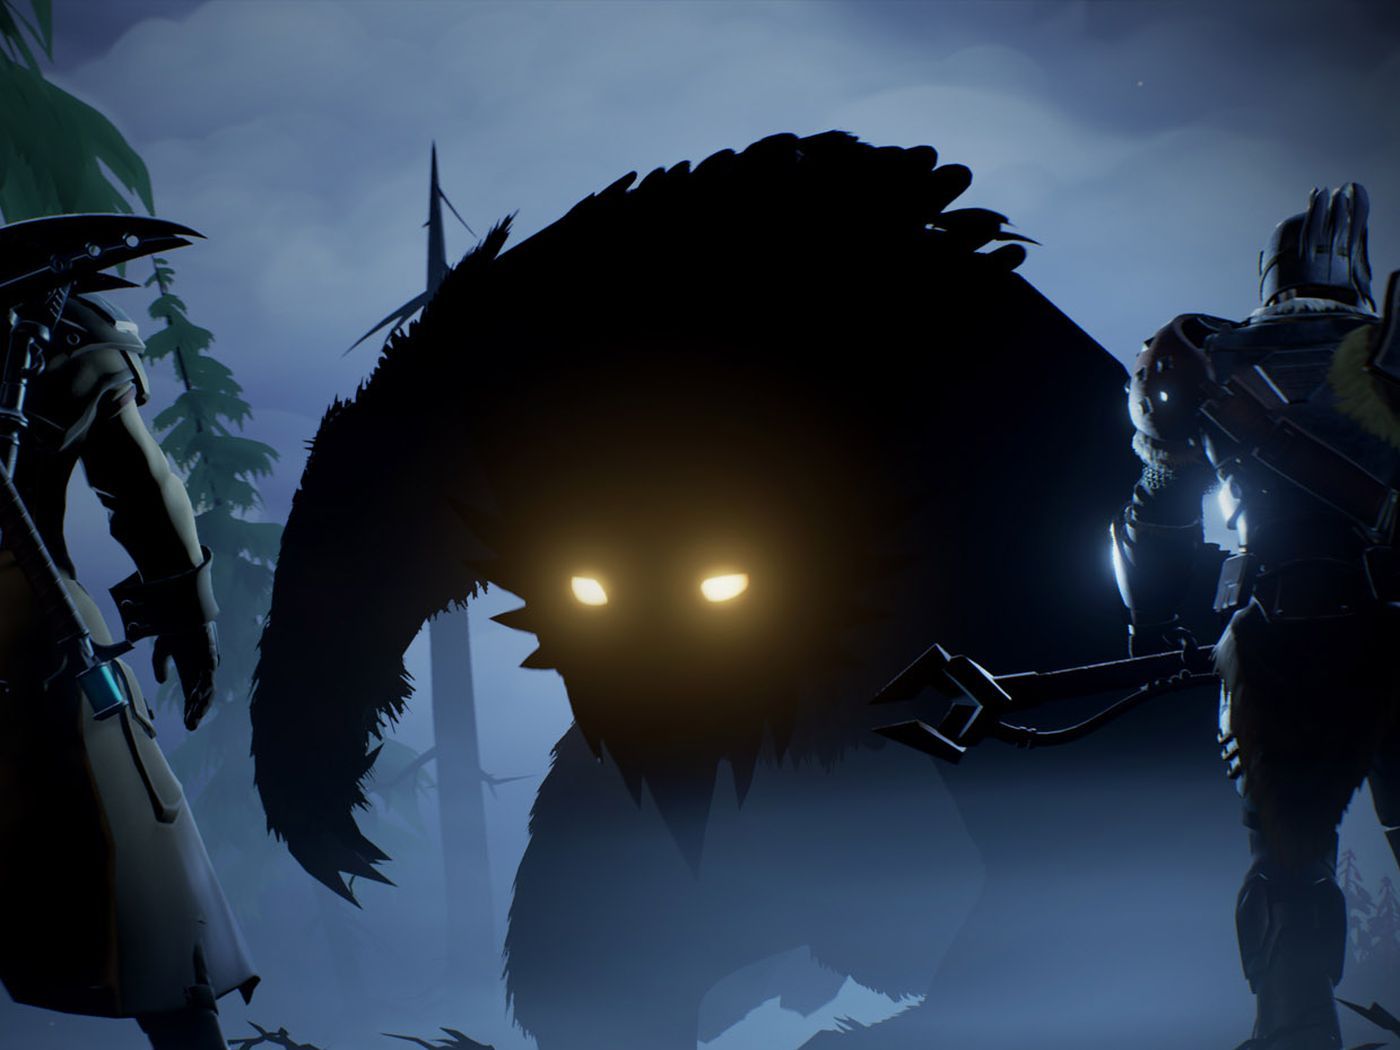 Dauntless aims to bring the best of Monster Hunter to a much